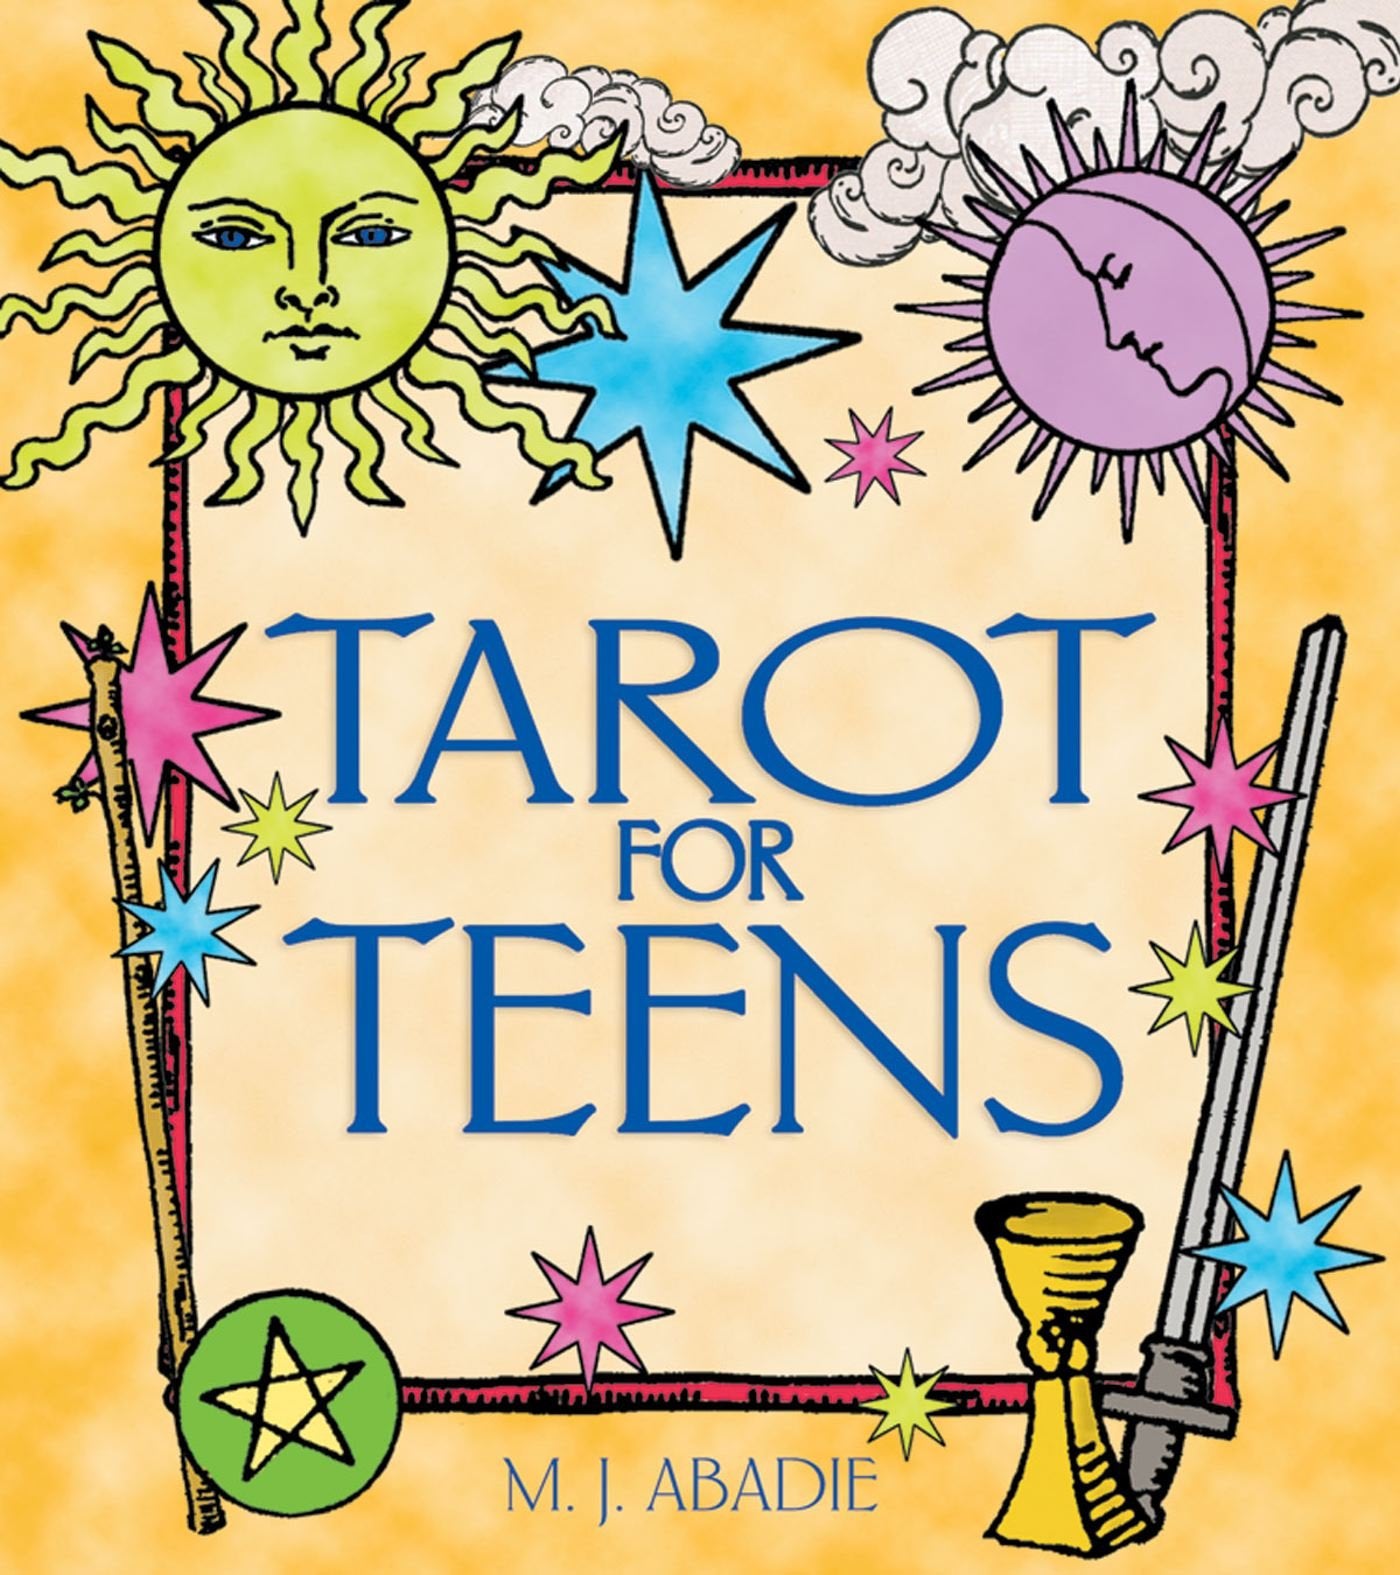 Tarot for Teens 100 b & w illustrations by MJ Abadie